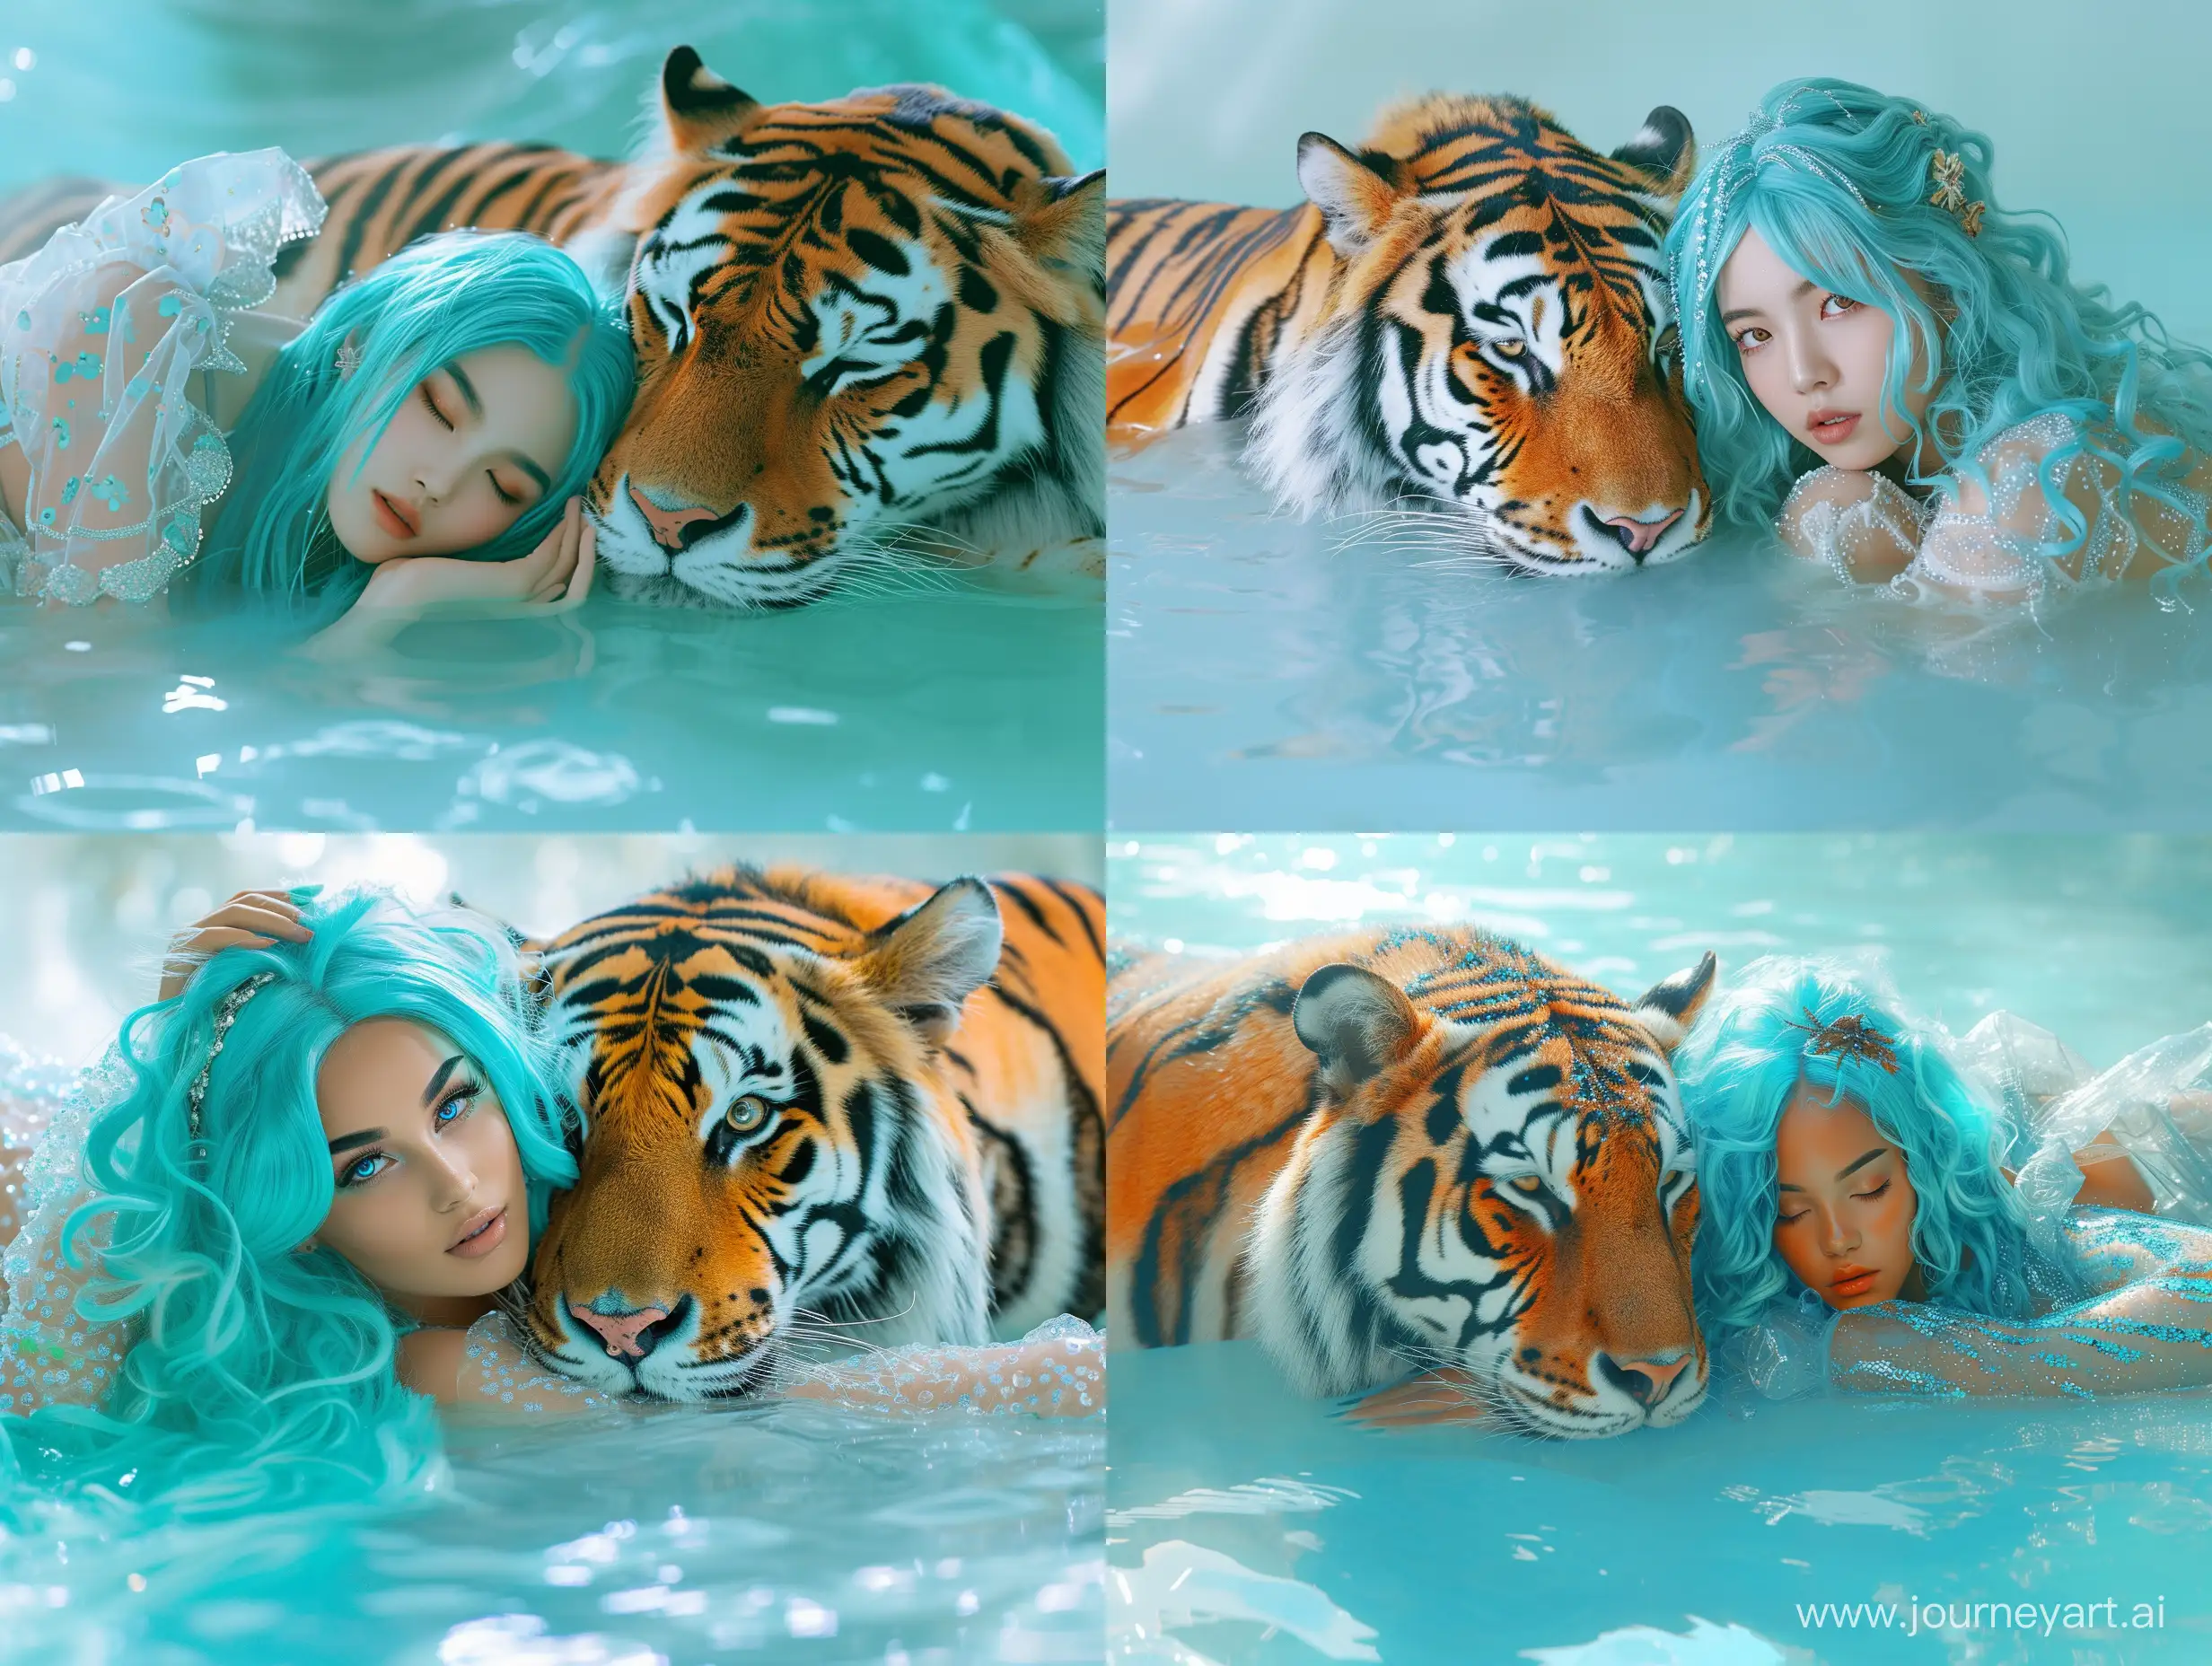 12 year  girl  blue, Translucent, Water-like, Supple, watery, Gelatinous, Luminous, shimmering, surreal, glowing, a model laying near a tiger with blue hair, in the style of dreamlike illustrations, realistic hyper-detail, light turquoise, dot-painted colors, optical blending, soft yet vibrant, hyper-realistic pop, dreamlike figures